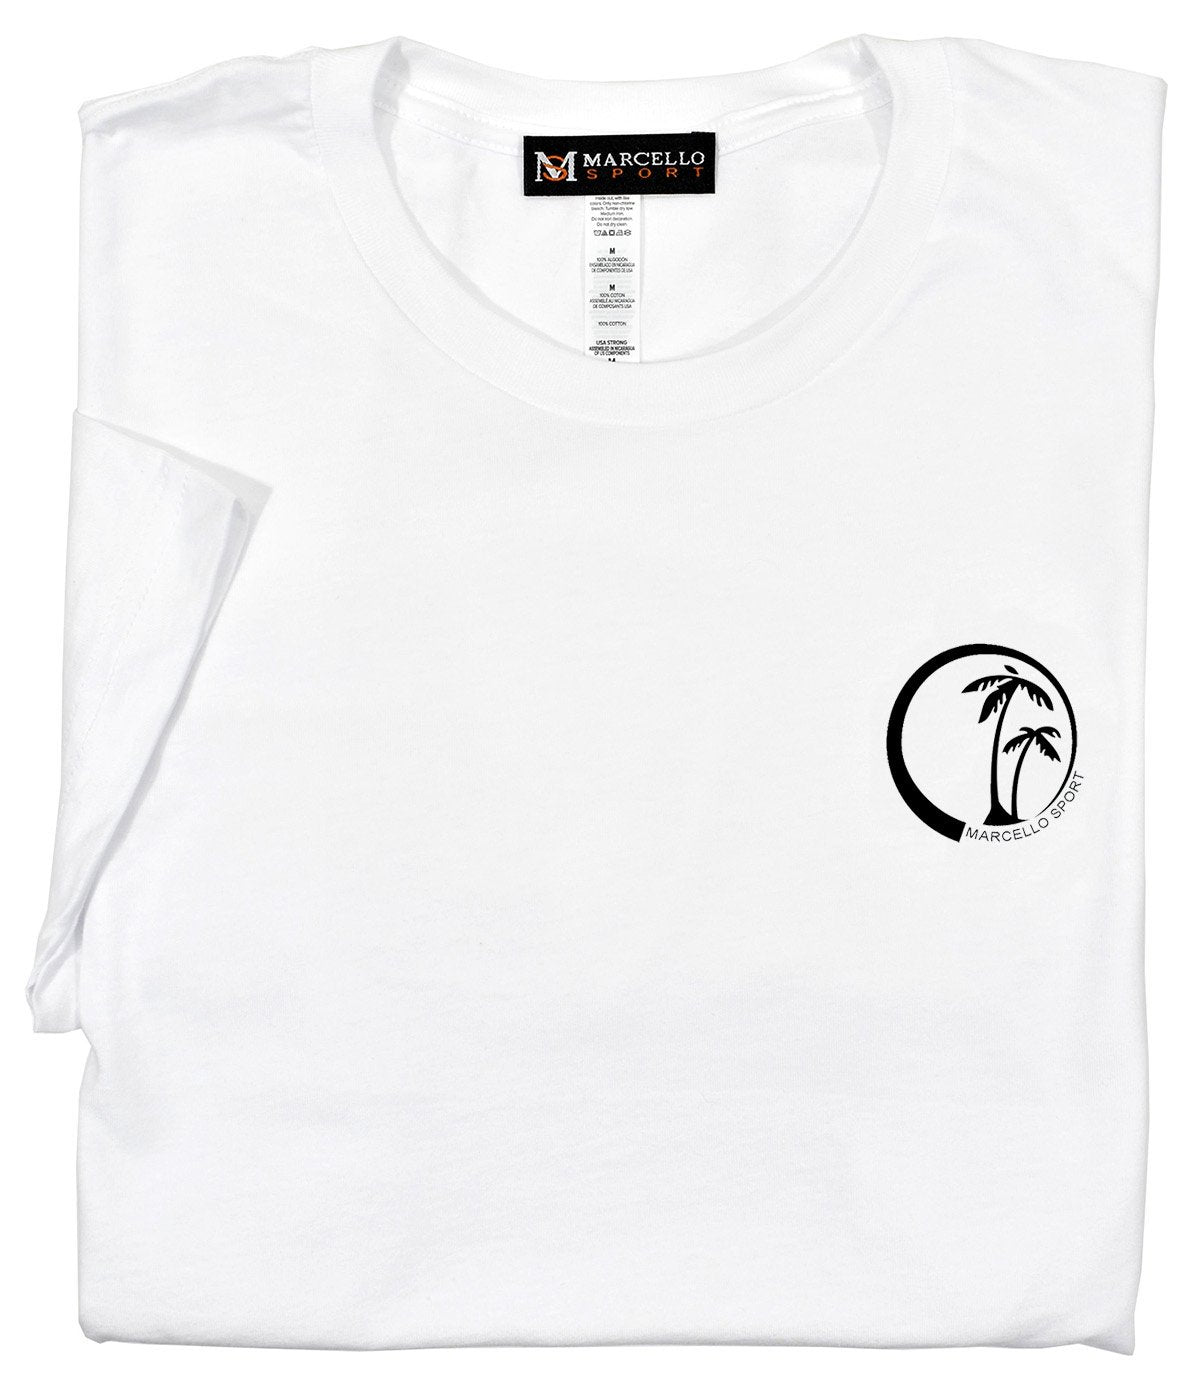 Marcello Caribbean Palm Tee  100% soft cotton, preshrunk. Ultra soft luxe cotton fabric. Contemporary fit, we suggest ordering one size up if between sizes or prefer a looser fit. Machine wash and dry.